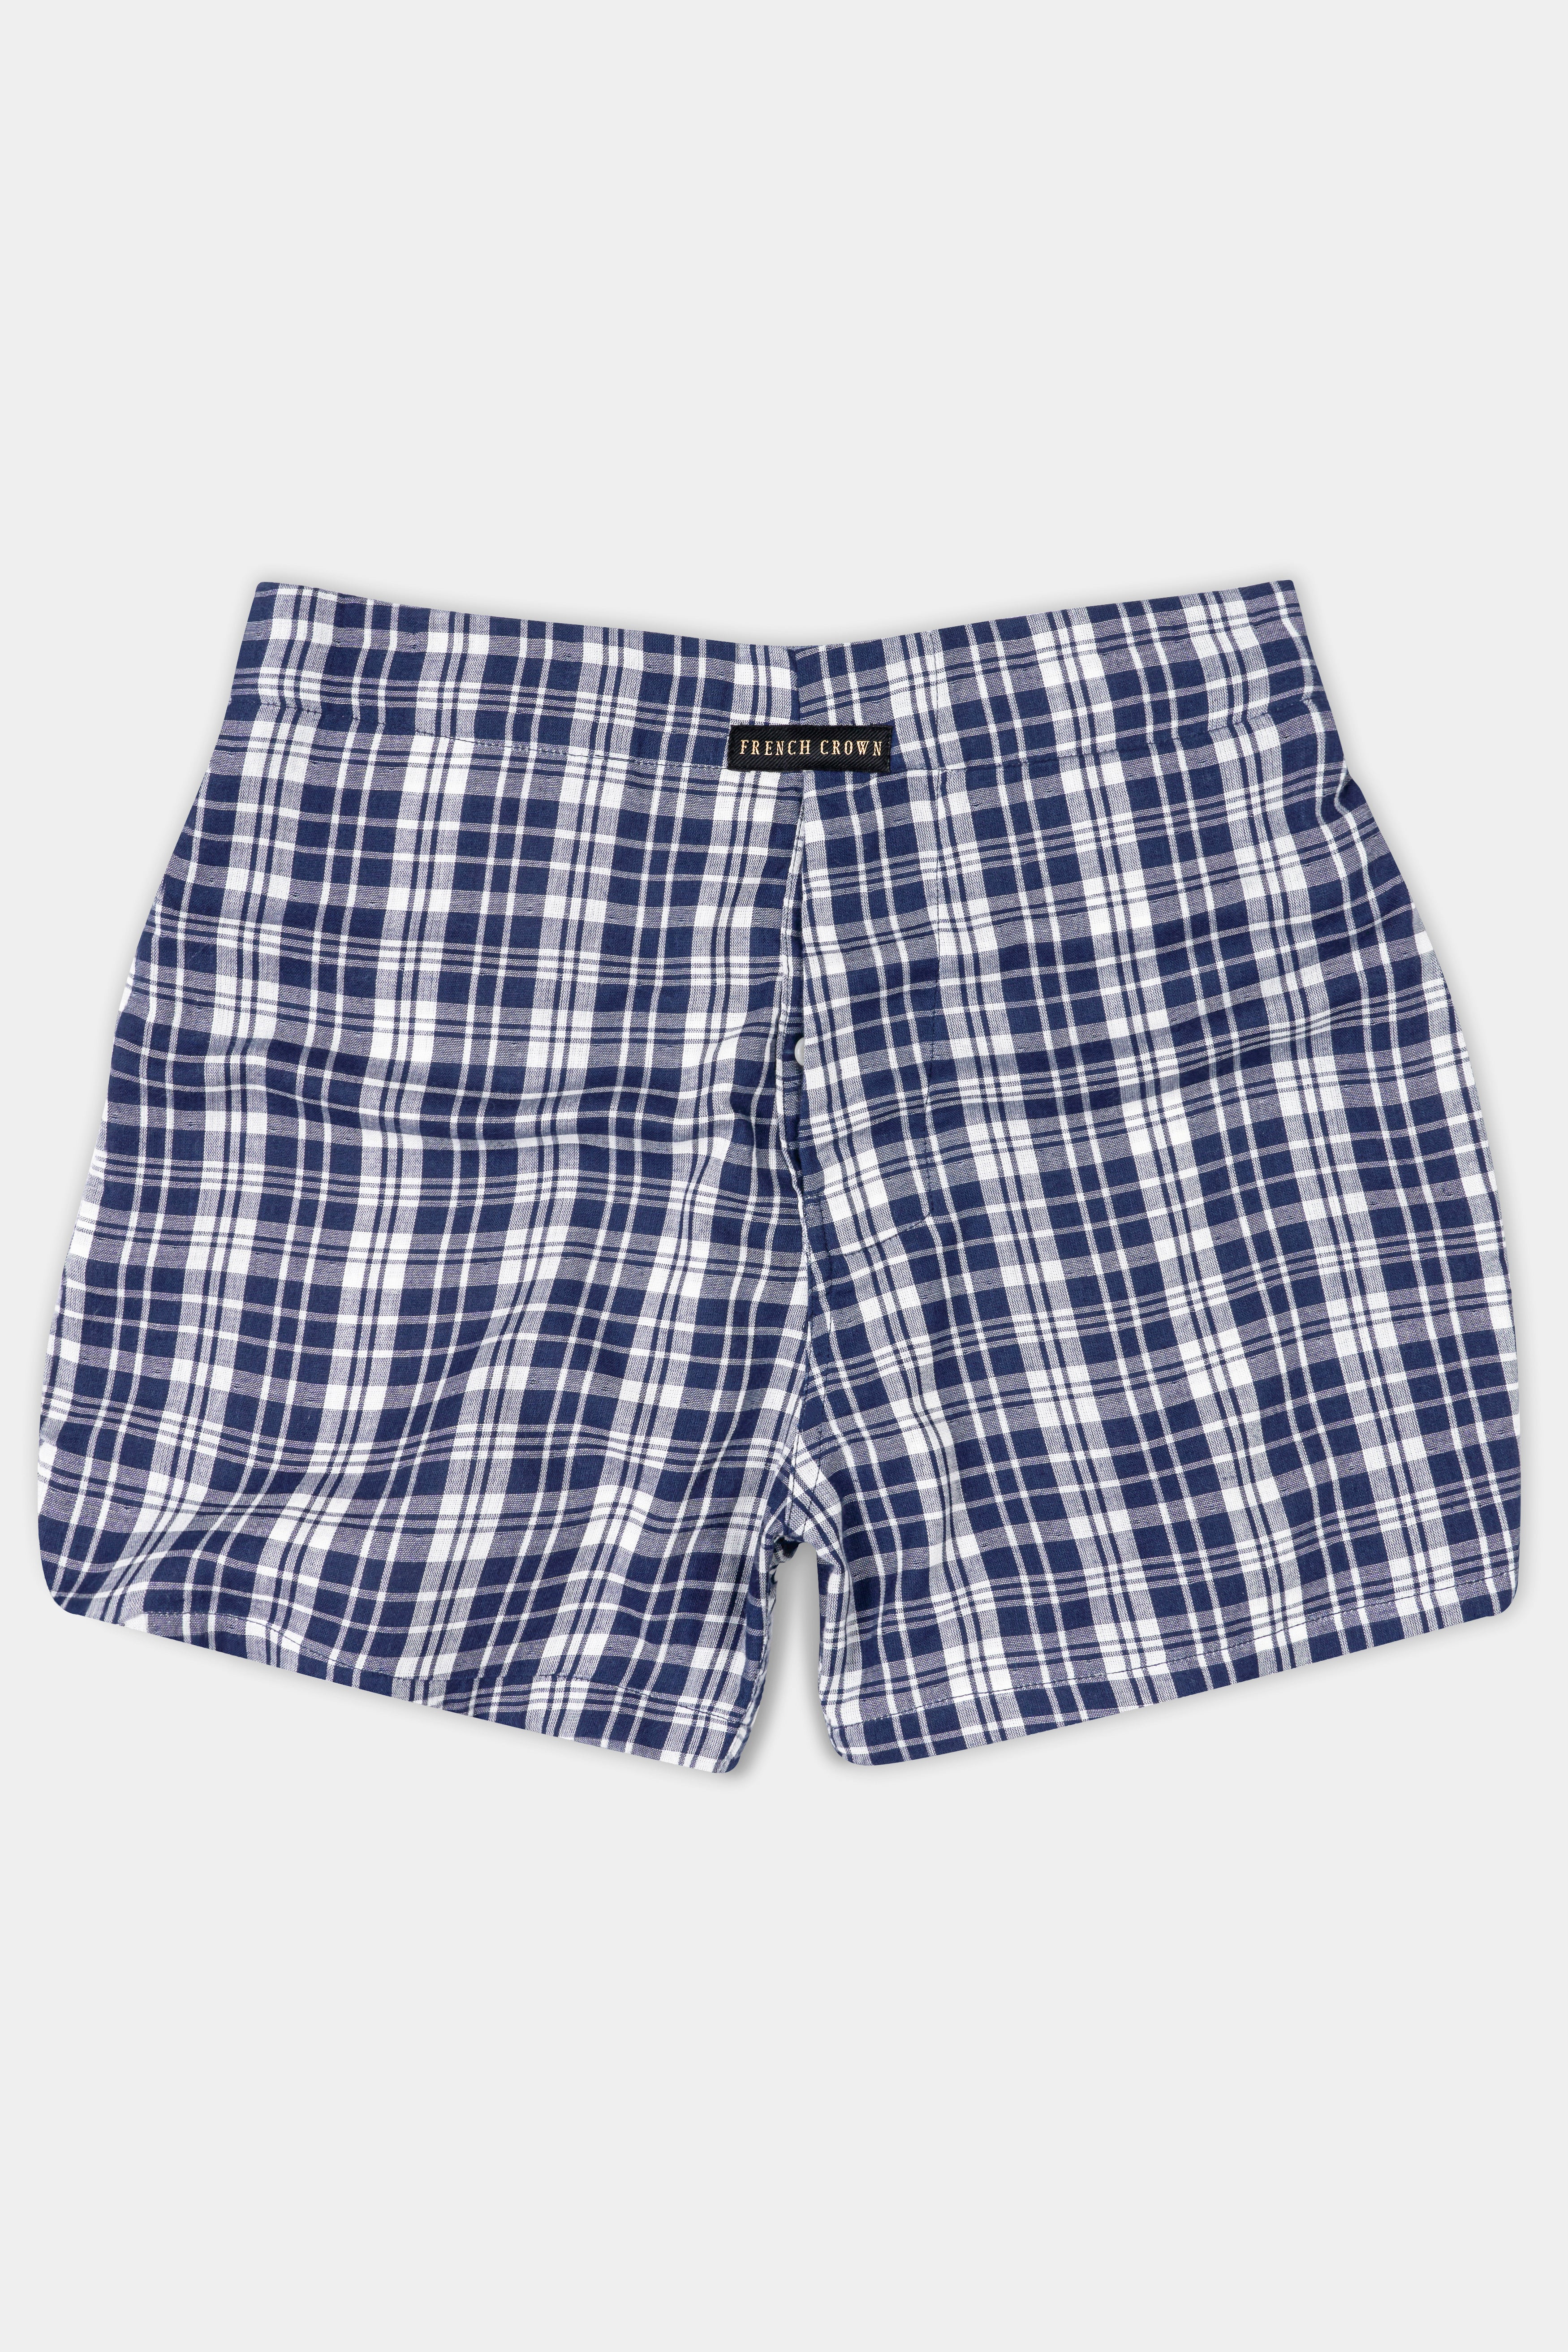 Bright White With Mirage Blue Checkered Premium Cotton Boxer BX548-28, BX548-30, BX548-32, BX548-34, BX548-36, BX548-38, BX548-40, BX548-42, BX548-44